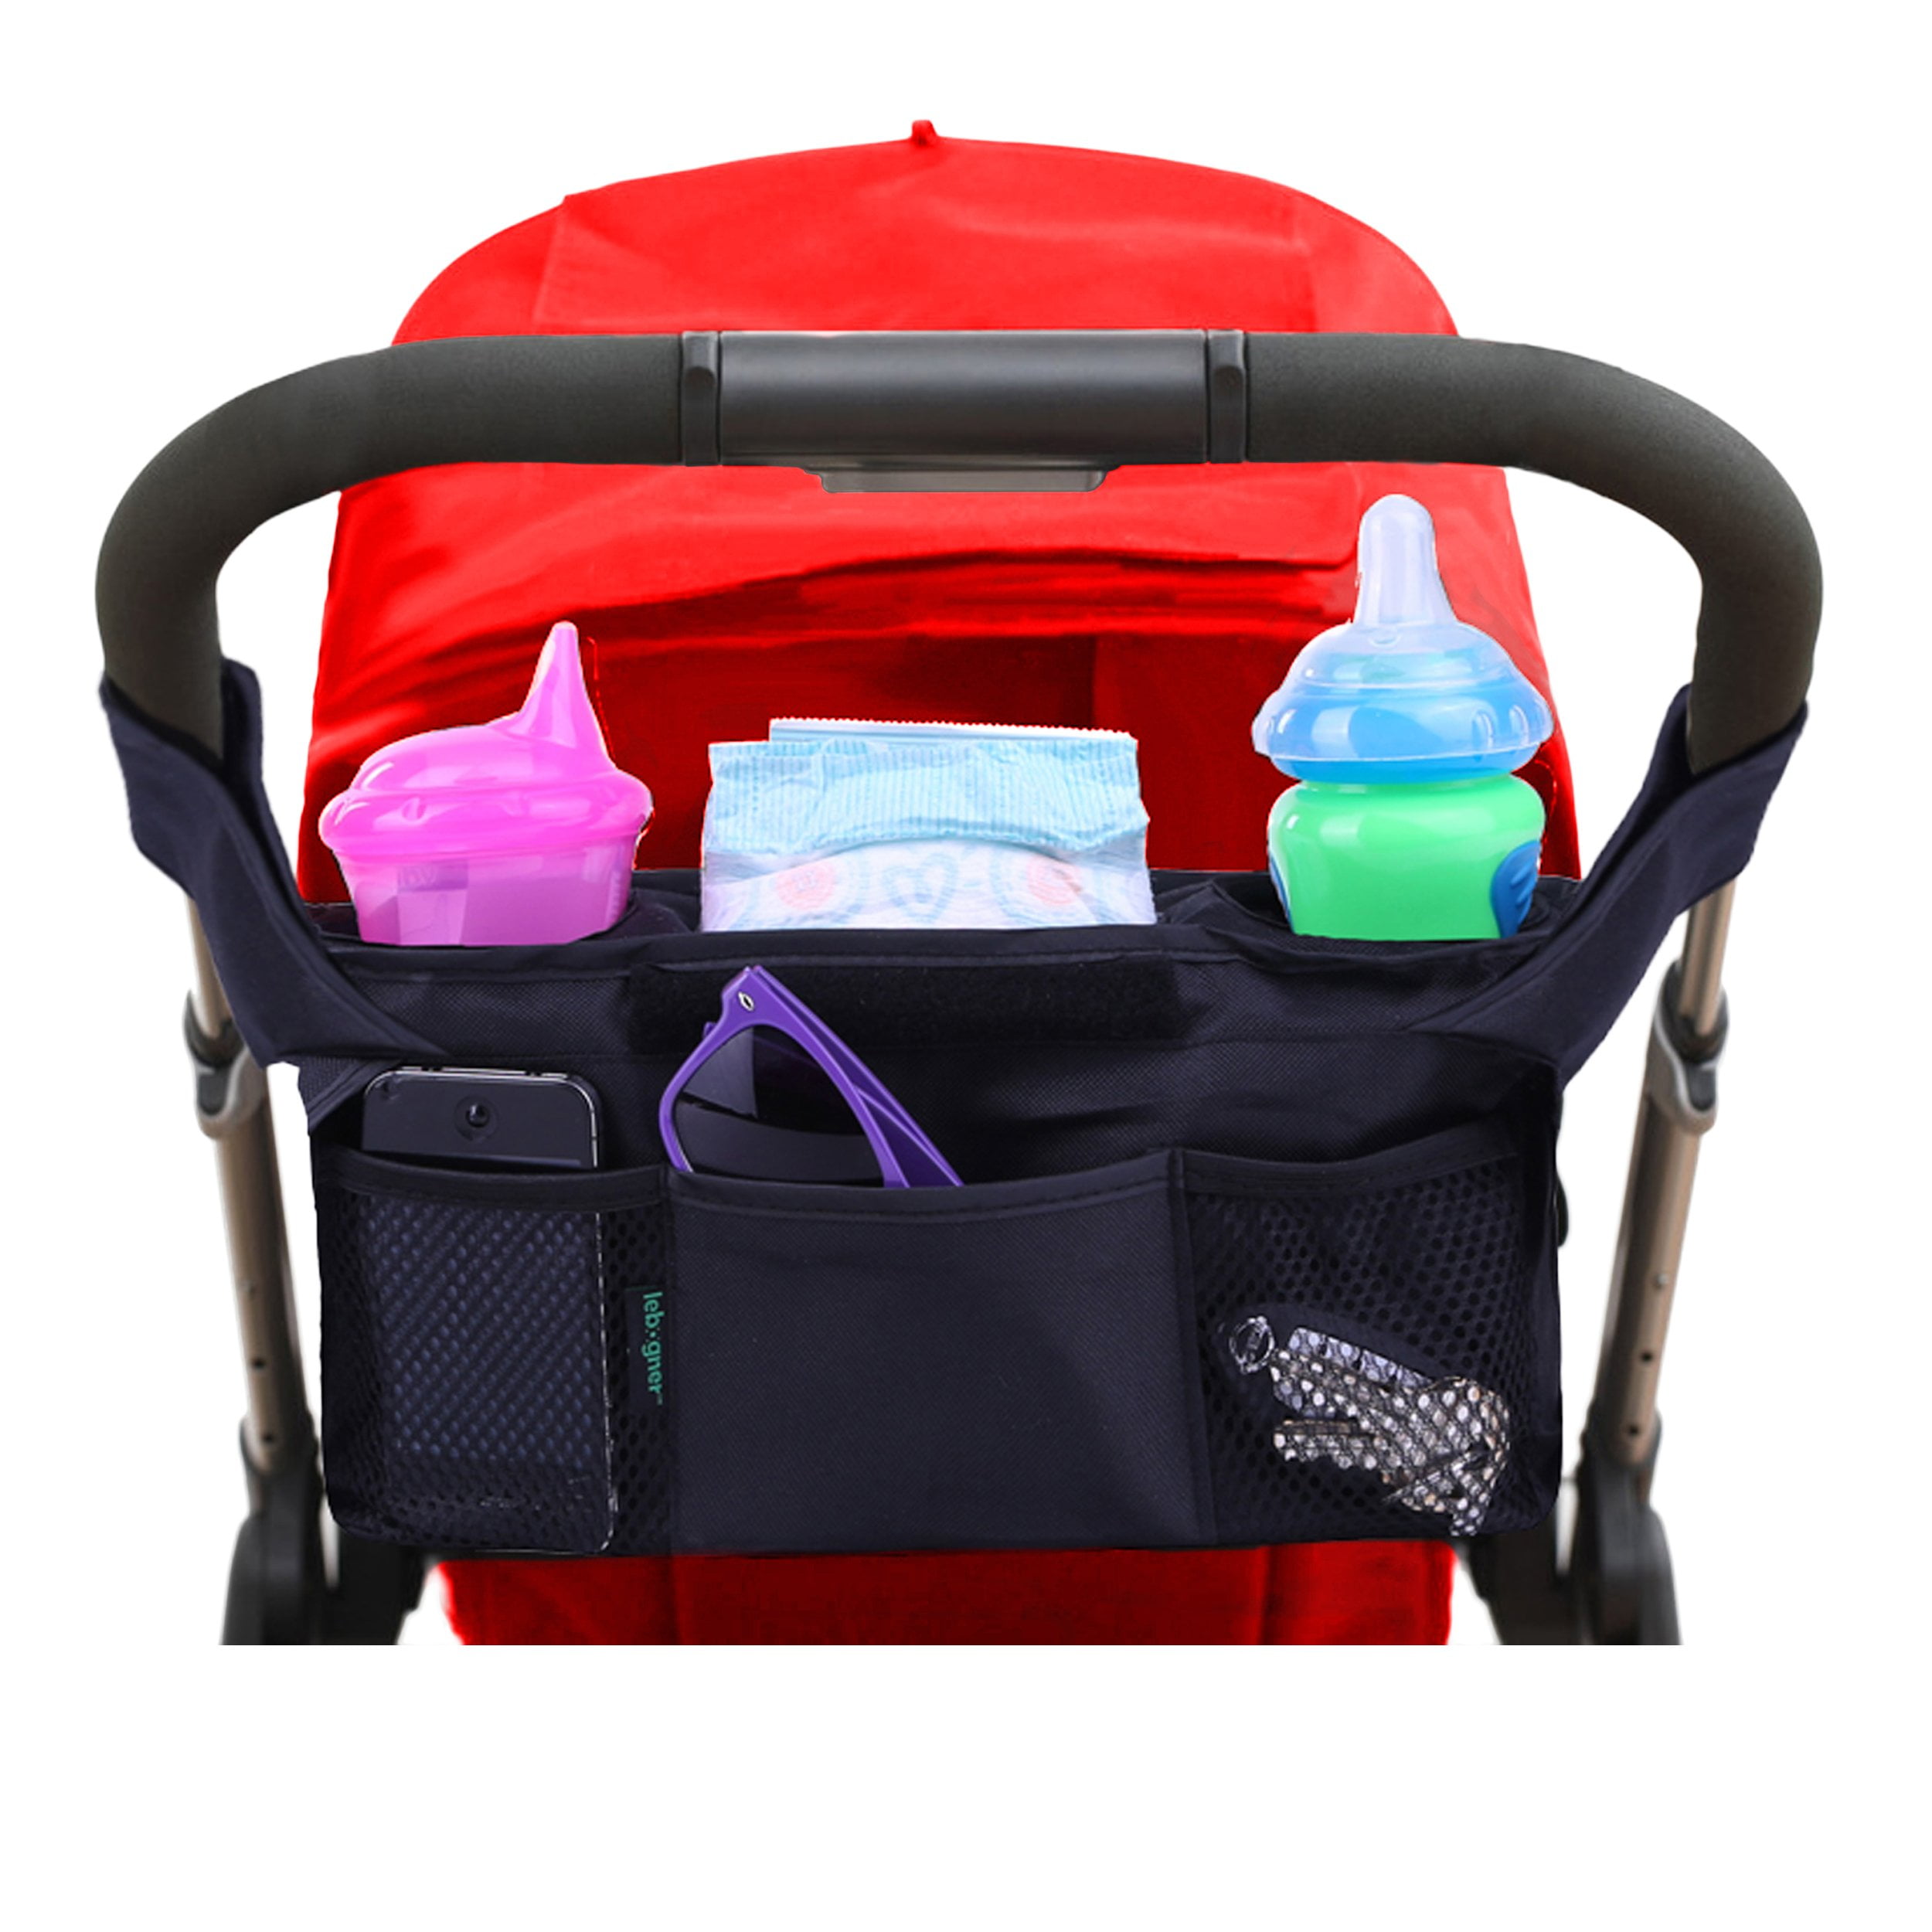 Polka Dots Cute Stroller Organizer Insulated Cup Holder Buggy Universal Baby Jogger